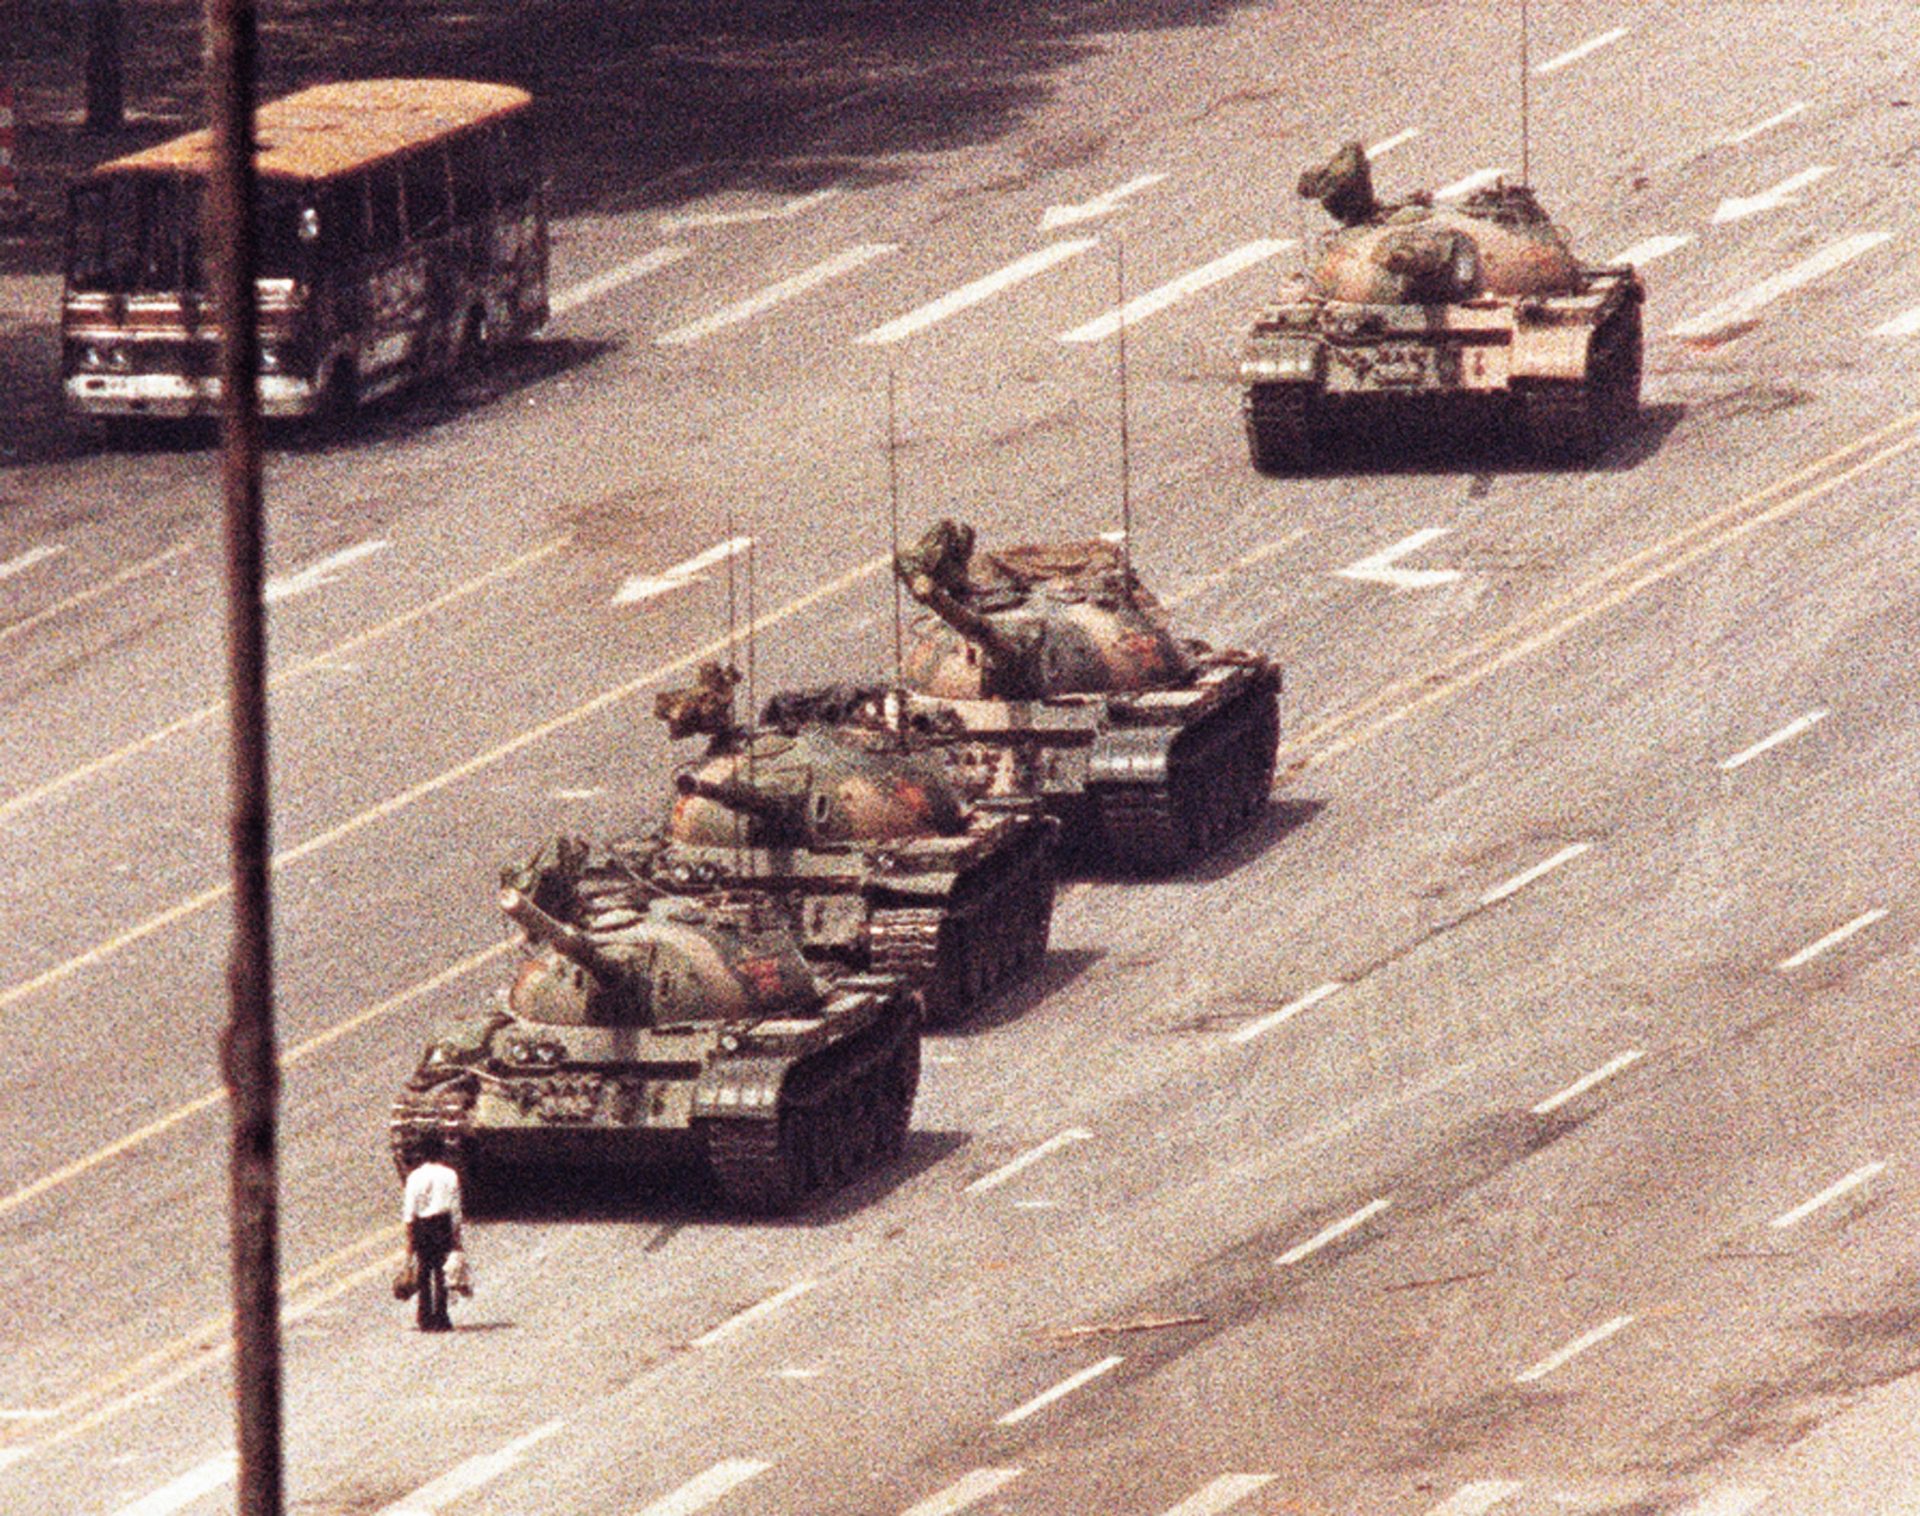 Microsoft says it blocked Tiananmen Sq. searches outside China attributable to ‘error’